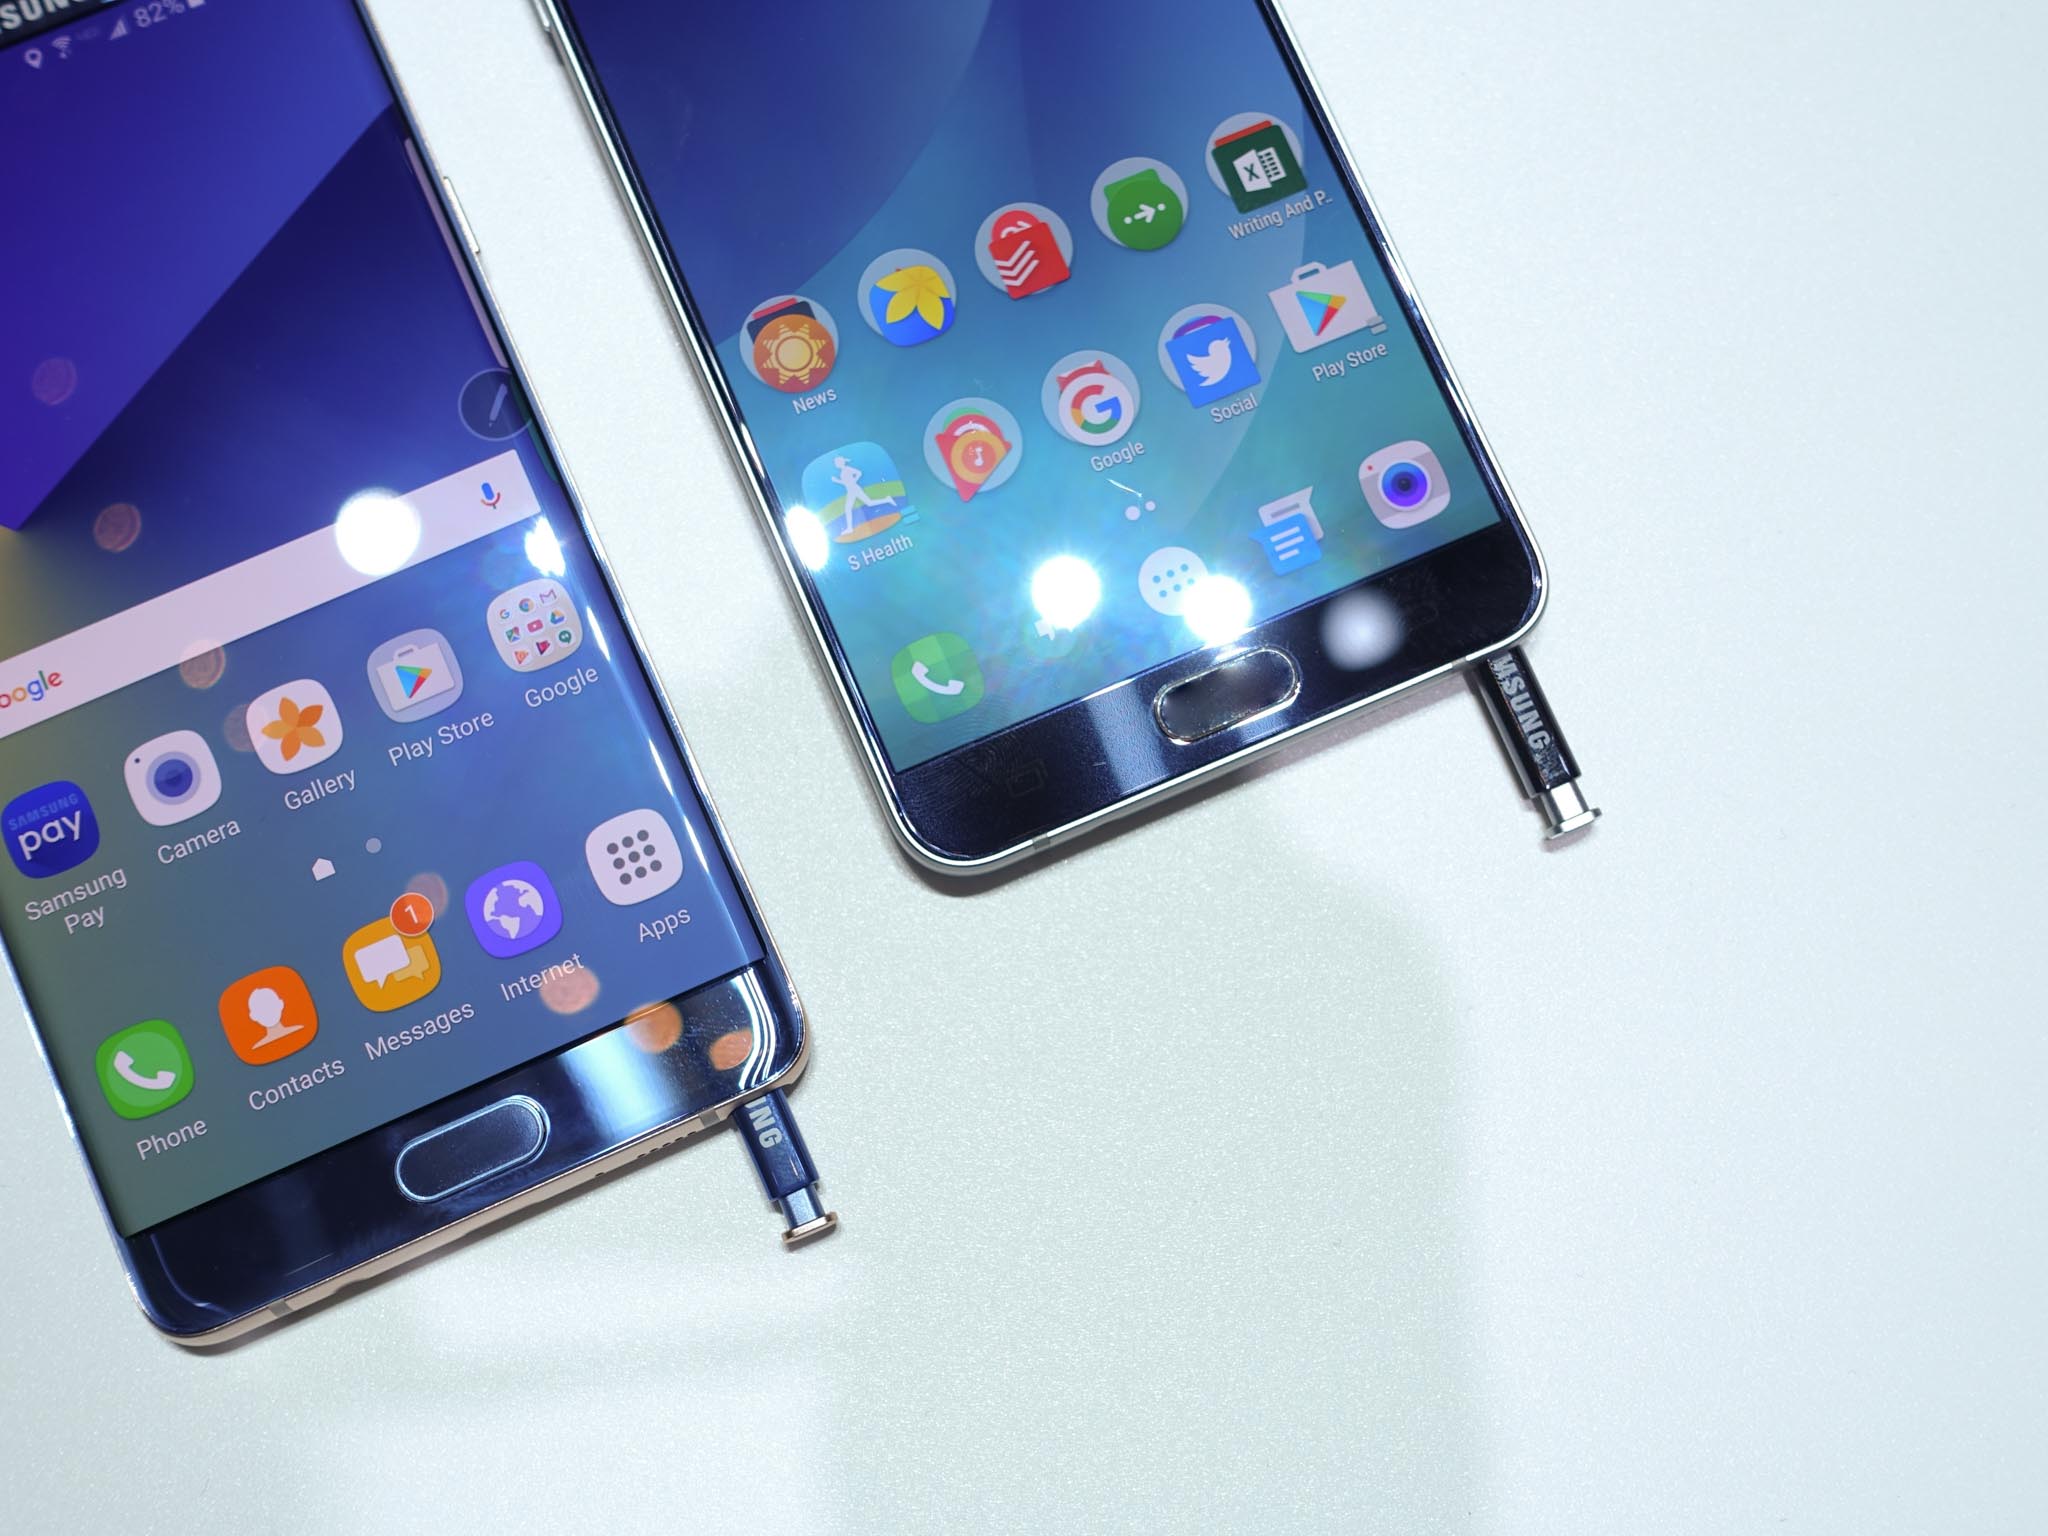 Samsung Galaxy Note 7 Vs Note 5 Should You Upgrade Android Central